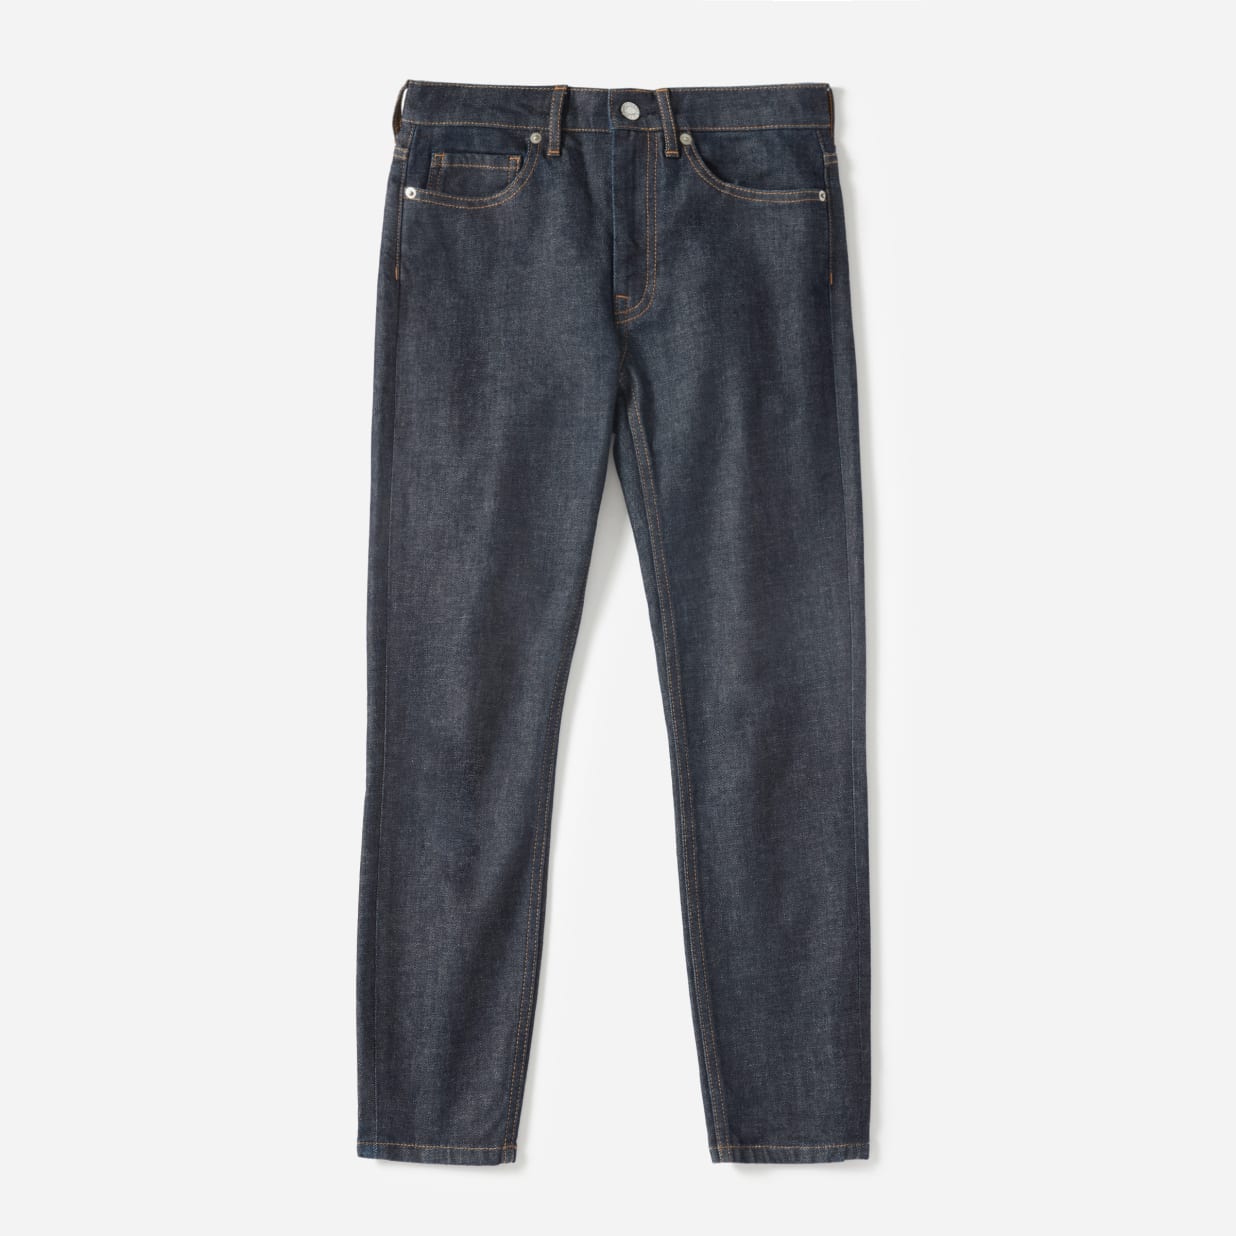 Everlane Size Chart Jeans